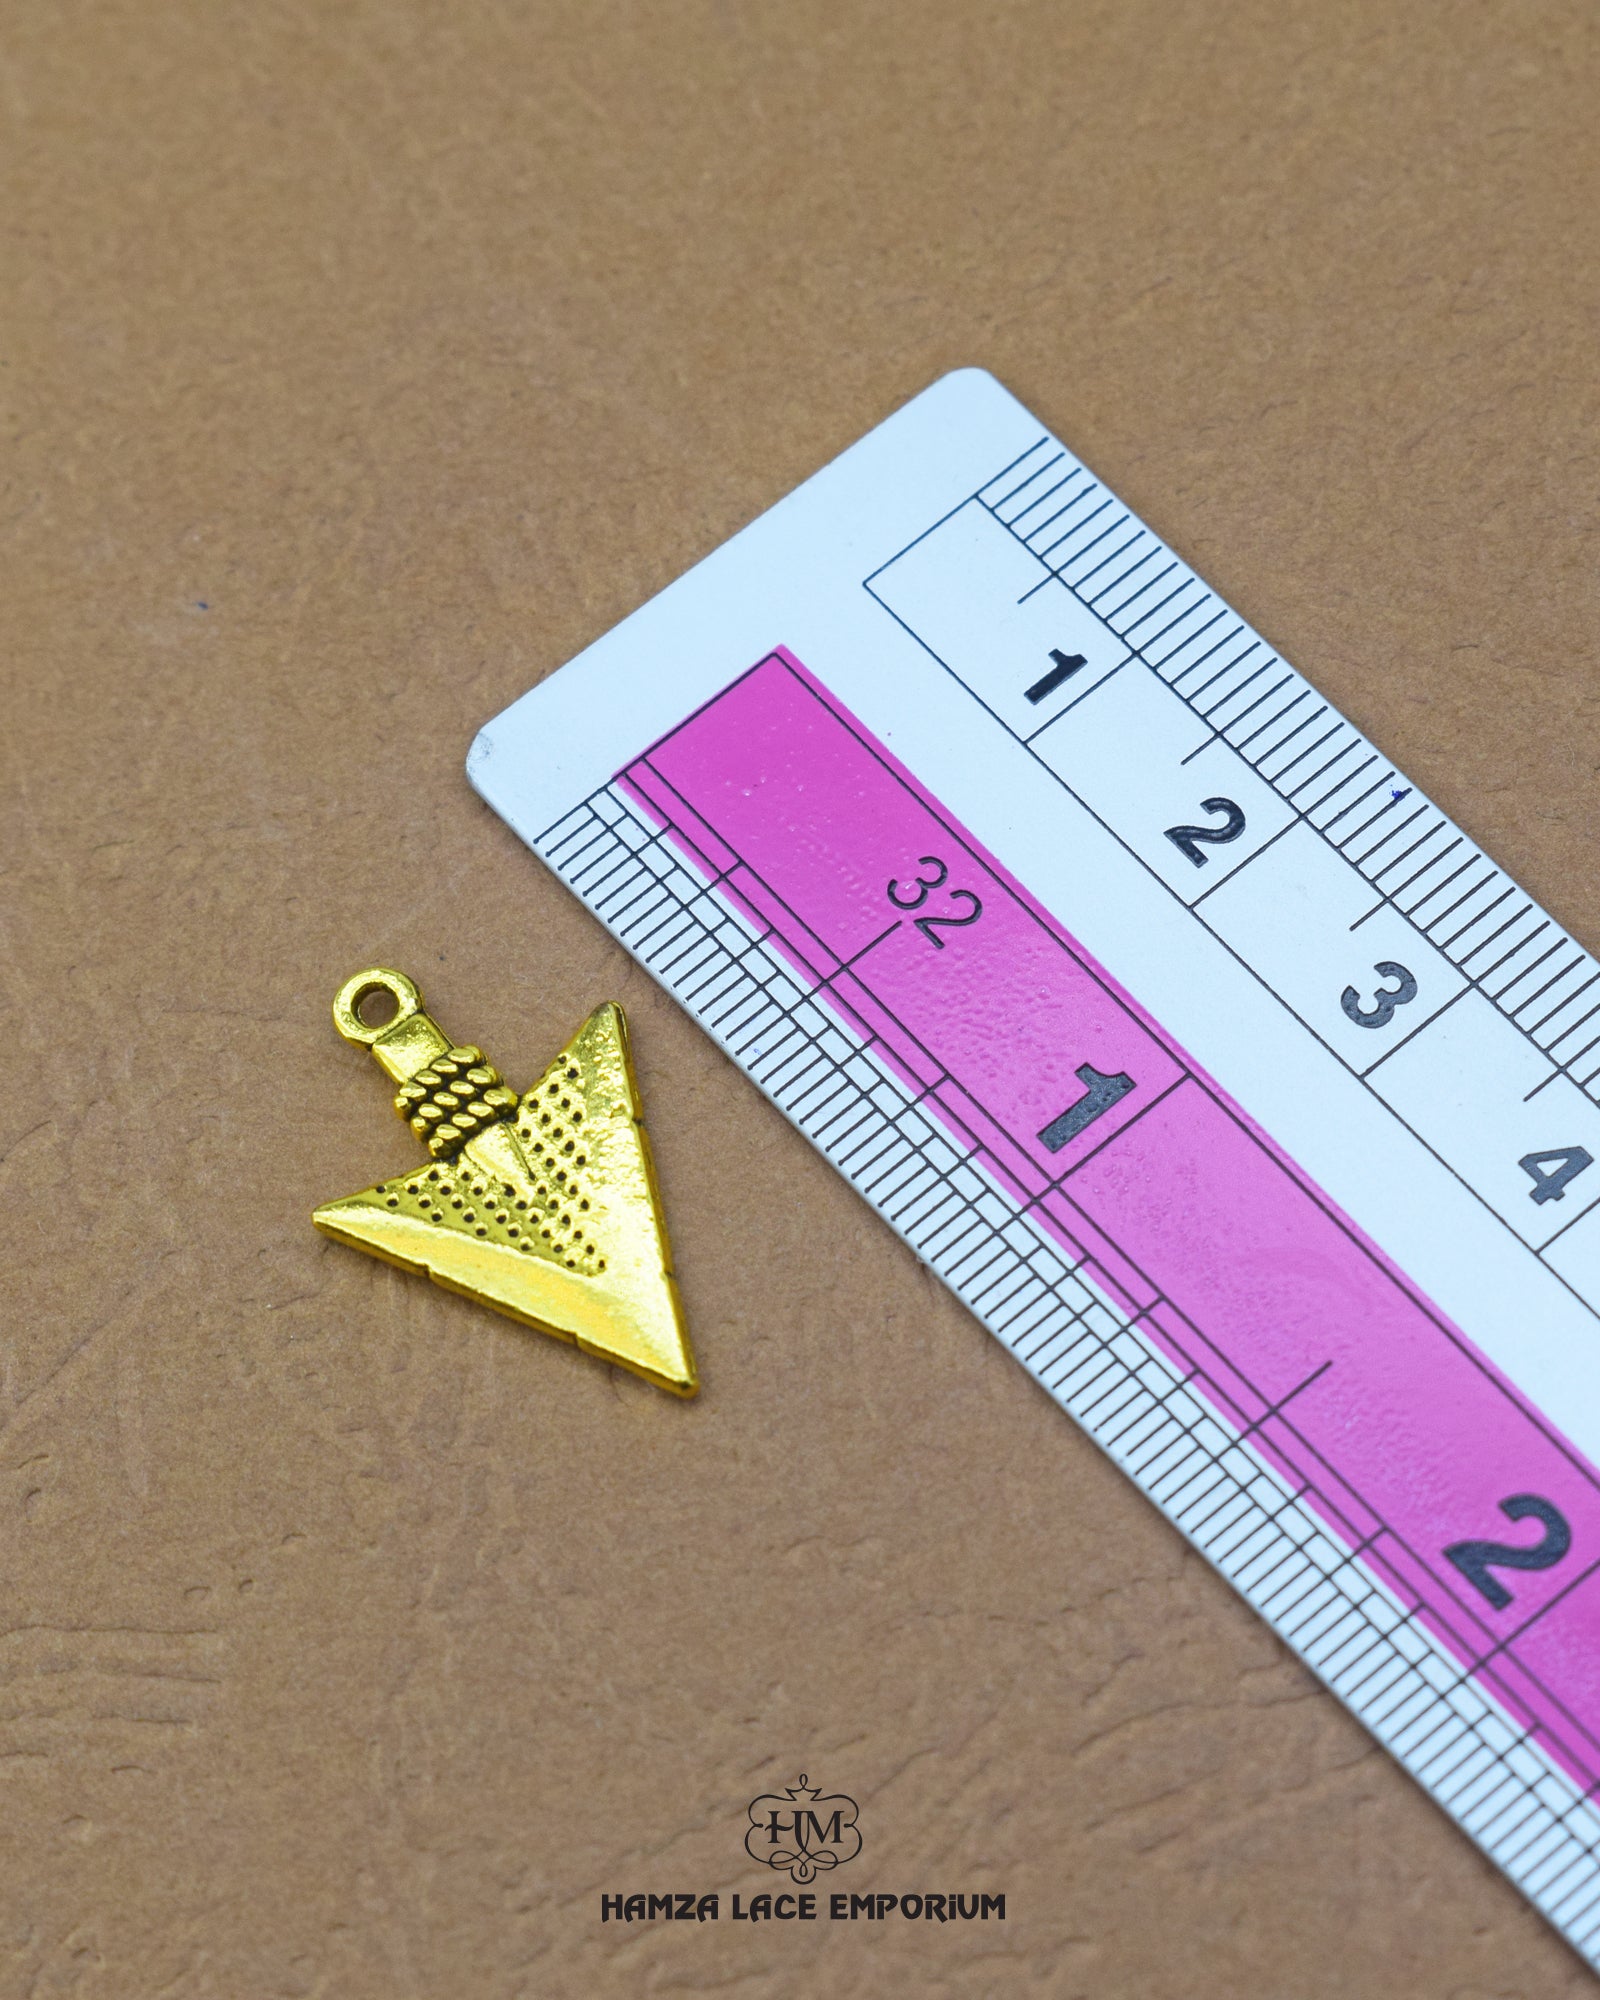 'Arrow Design Metal Button MA660' with ruler for size reference in the product image.